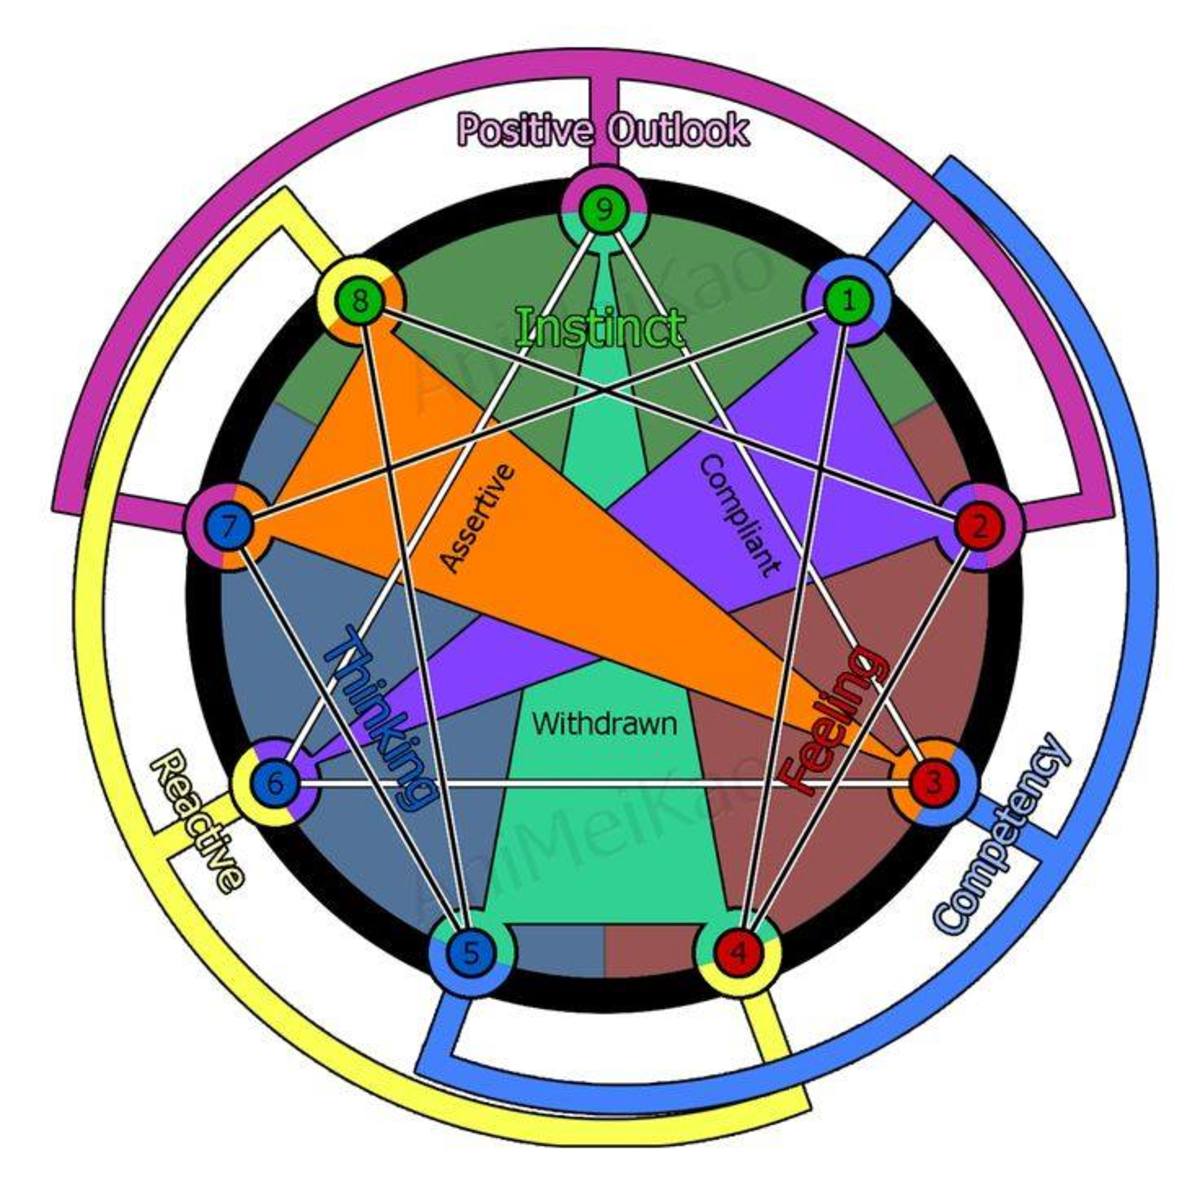 Enneagram Games And Activities Pin on Enneagram Products & Resources